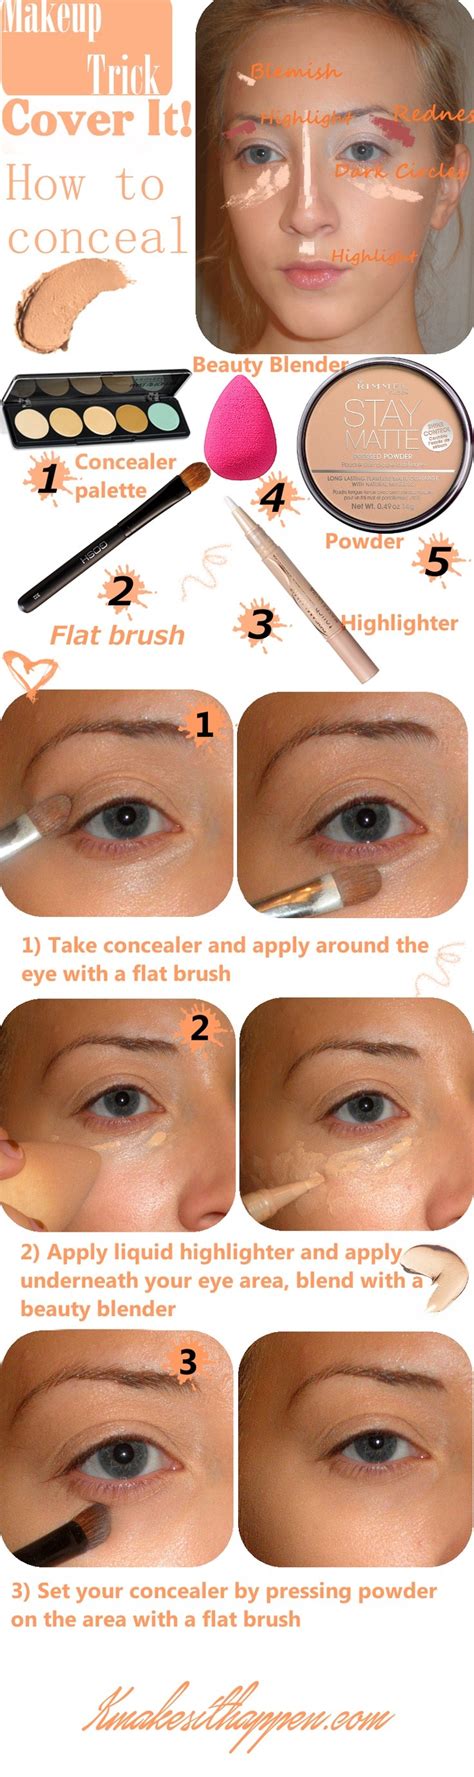 How To Use Concealer Fashion Darling Covering Acne With Makeup